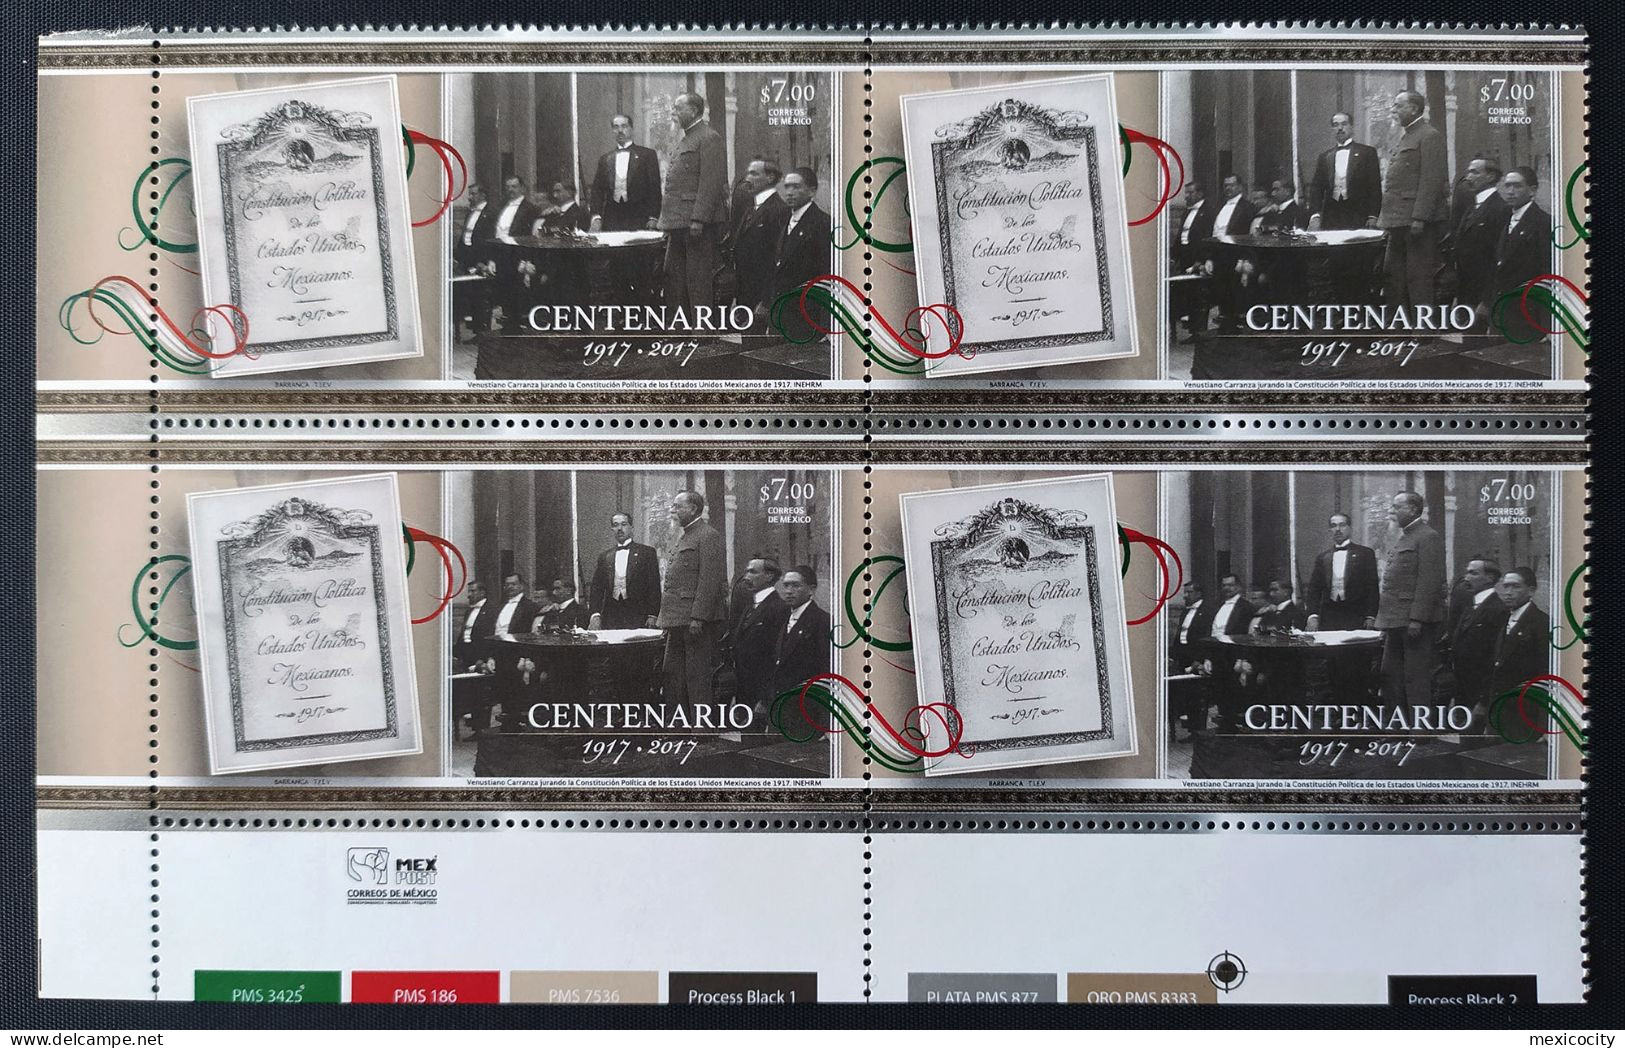 MEXICO 2017 CONSTITUTION Error In Blk. 4, No Bottom Color Ribbons In LL Stamp, See Image, Mint NH, Rare Rare Thus - México